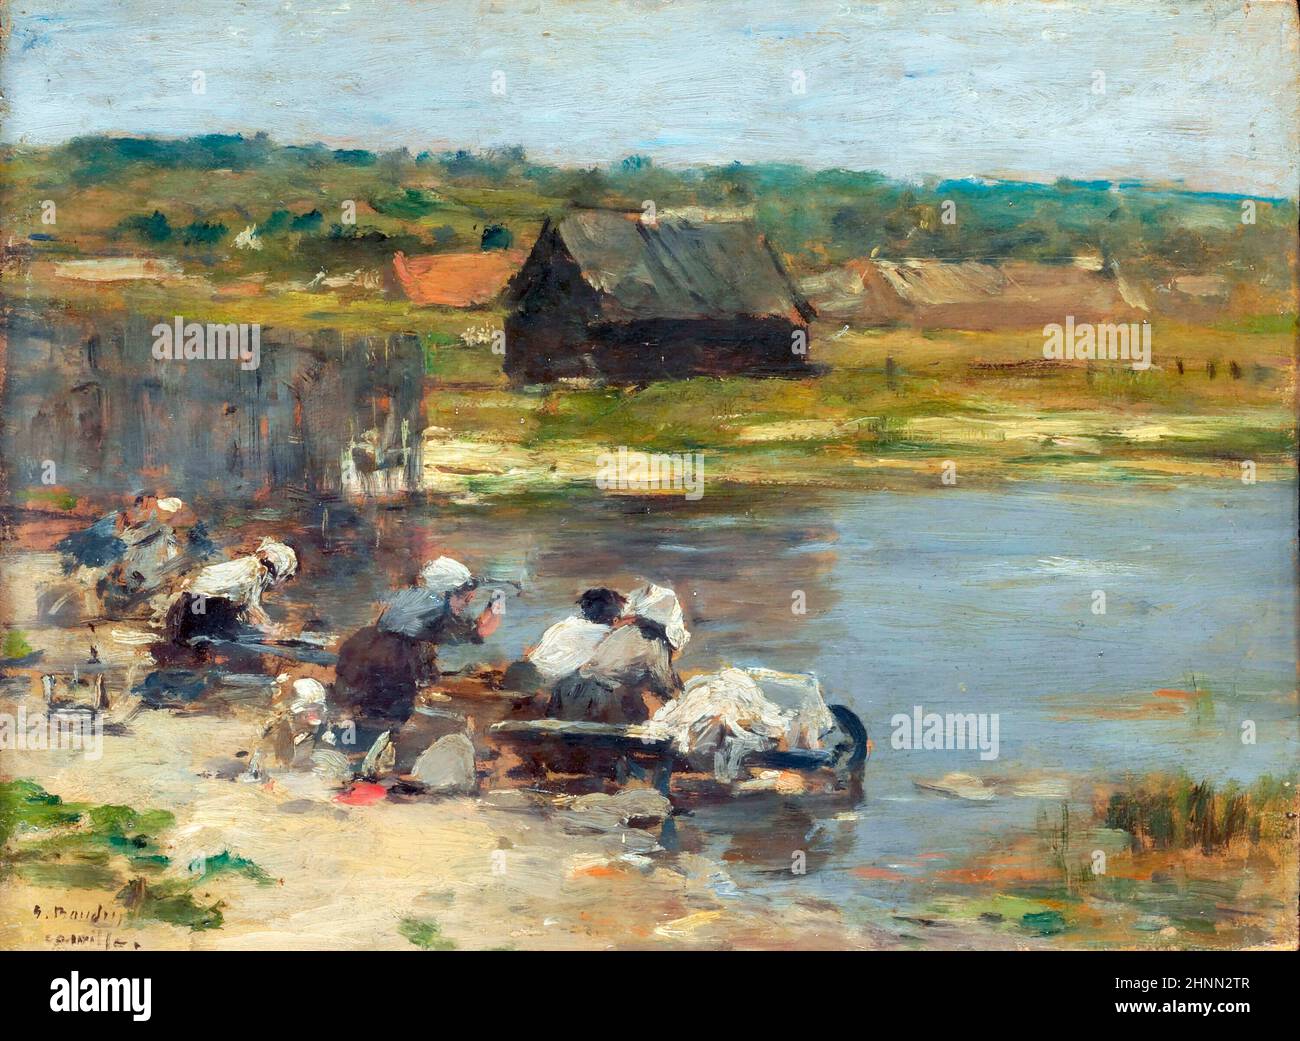 Washerwomen at the Edge of the Pond by Eugène Boudin (1824-1898), oil on panel, 1880/85 Stock Photo